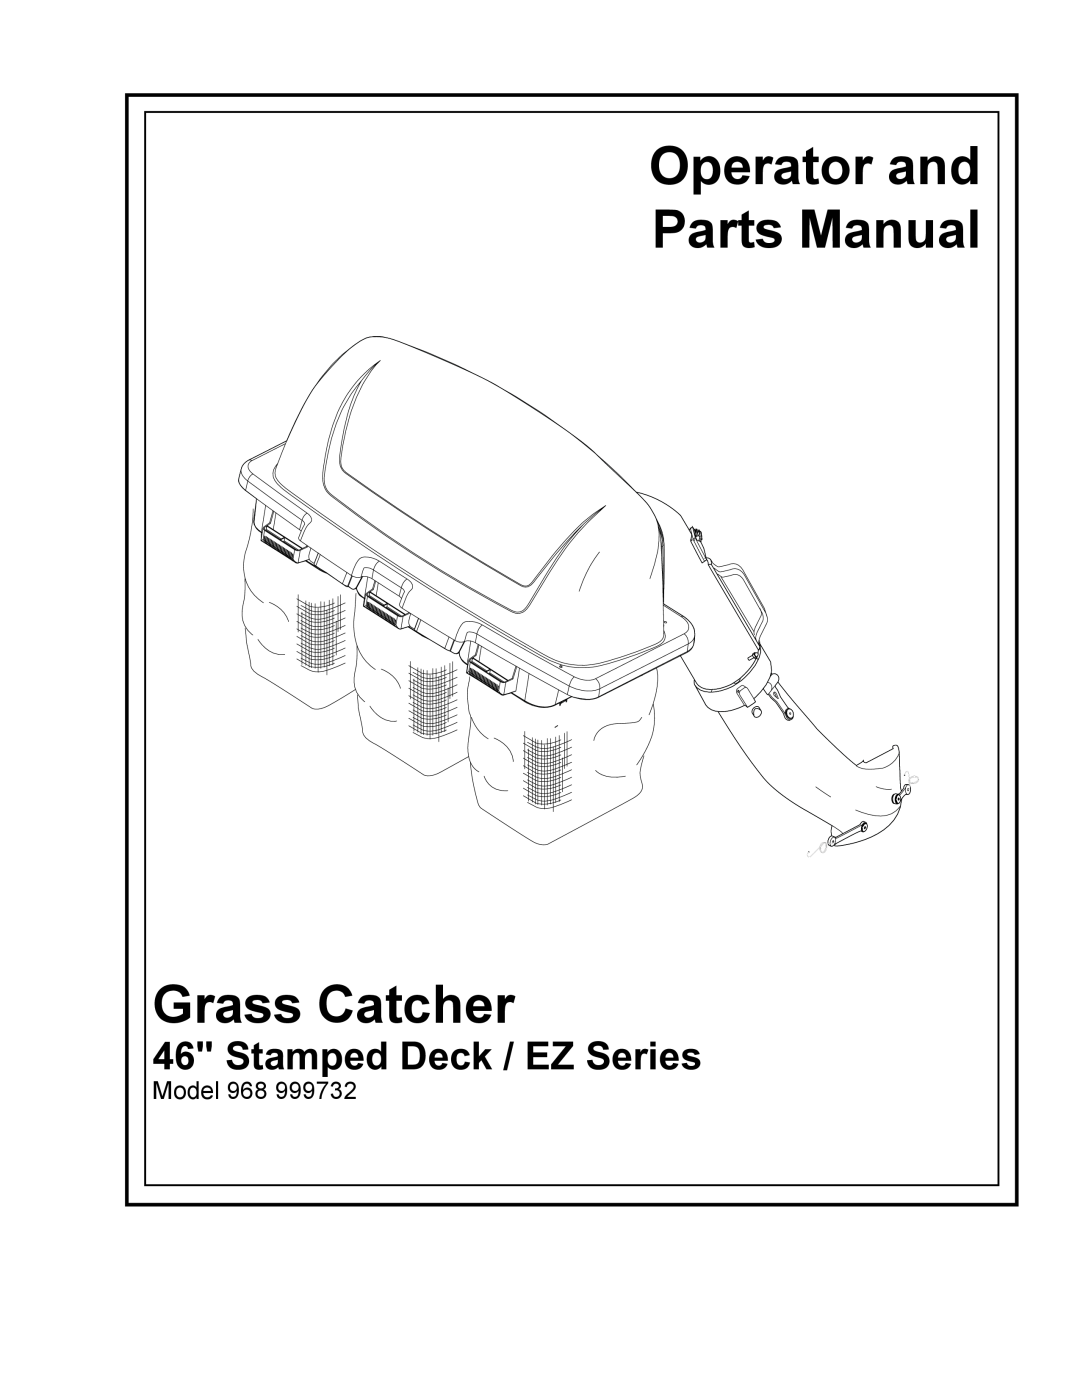 HTC 968 999732 manual Operator and Parts Manual Grass Catcher, Stamped Deck / EZ Series, Model 968 